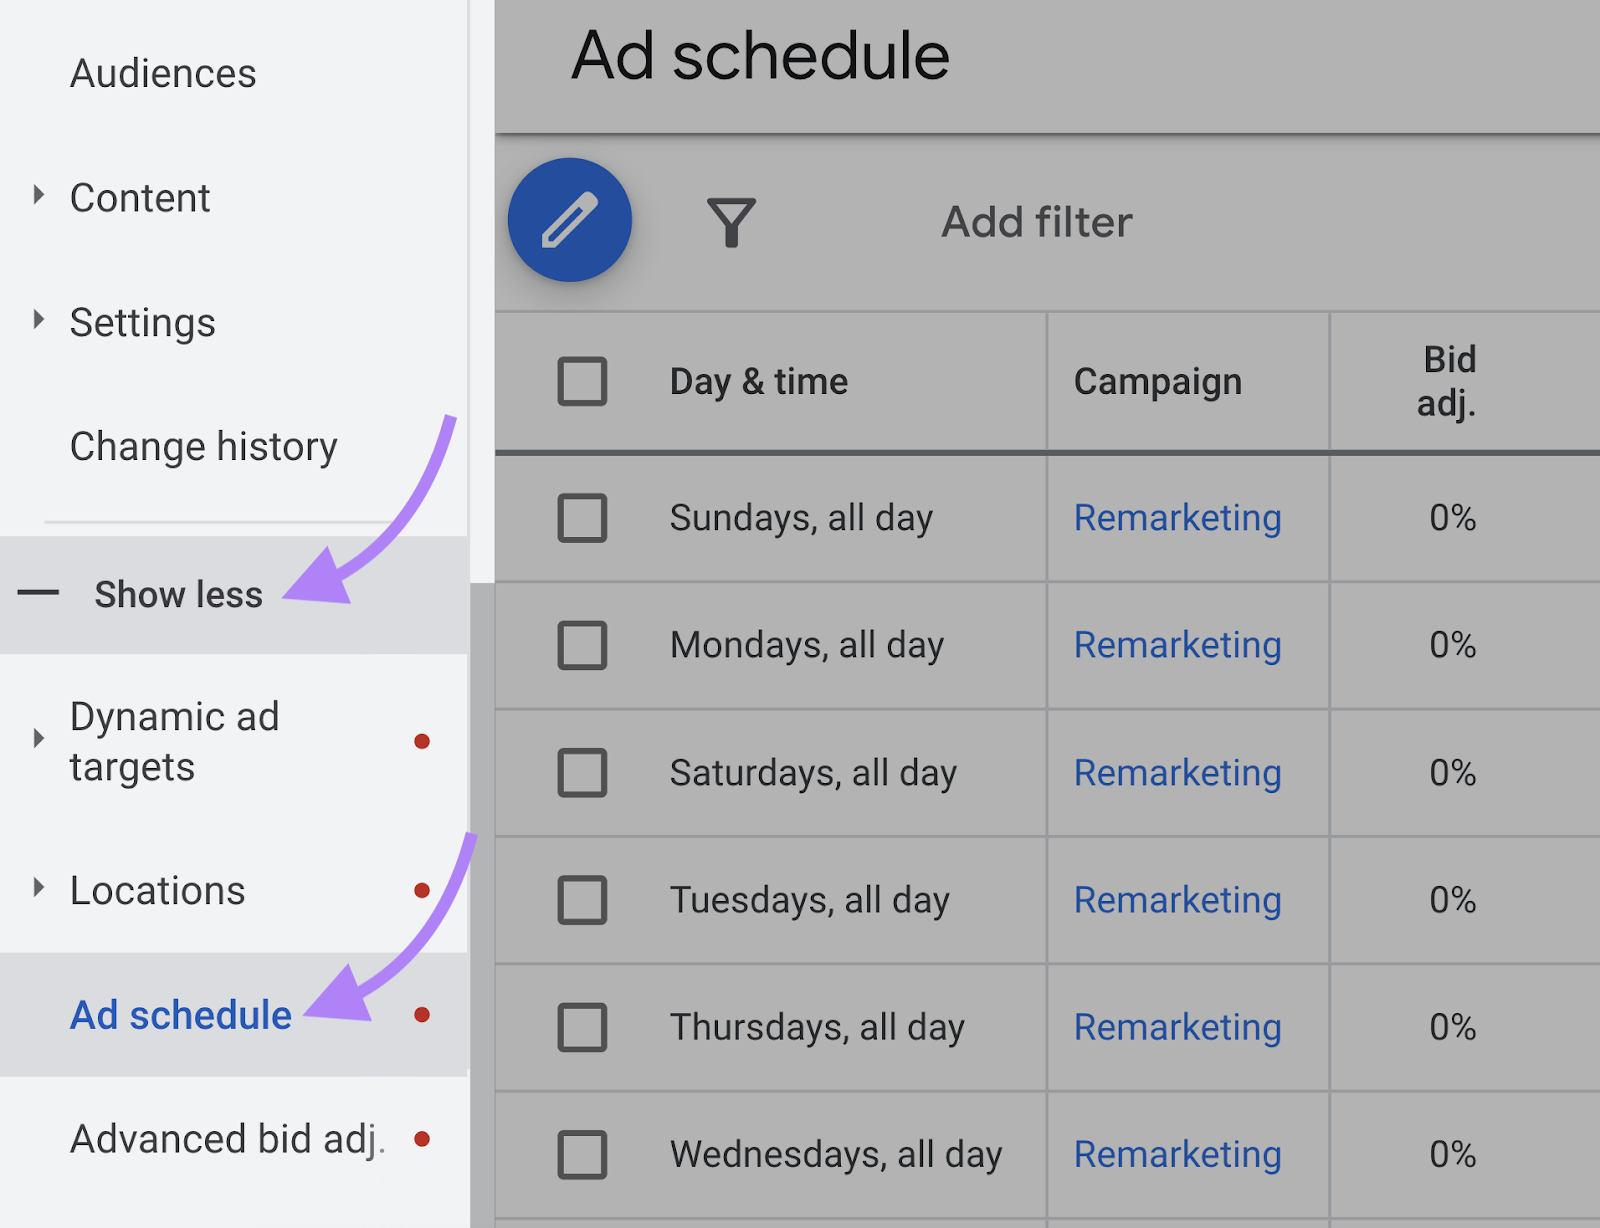 navigation to “Ad schedule” button 